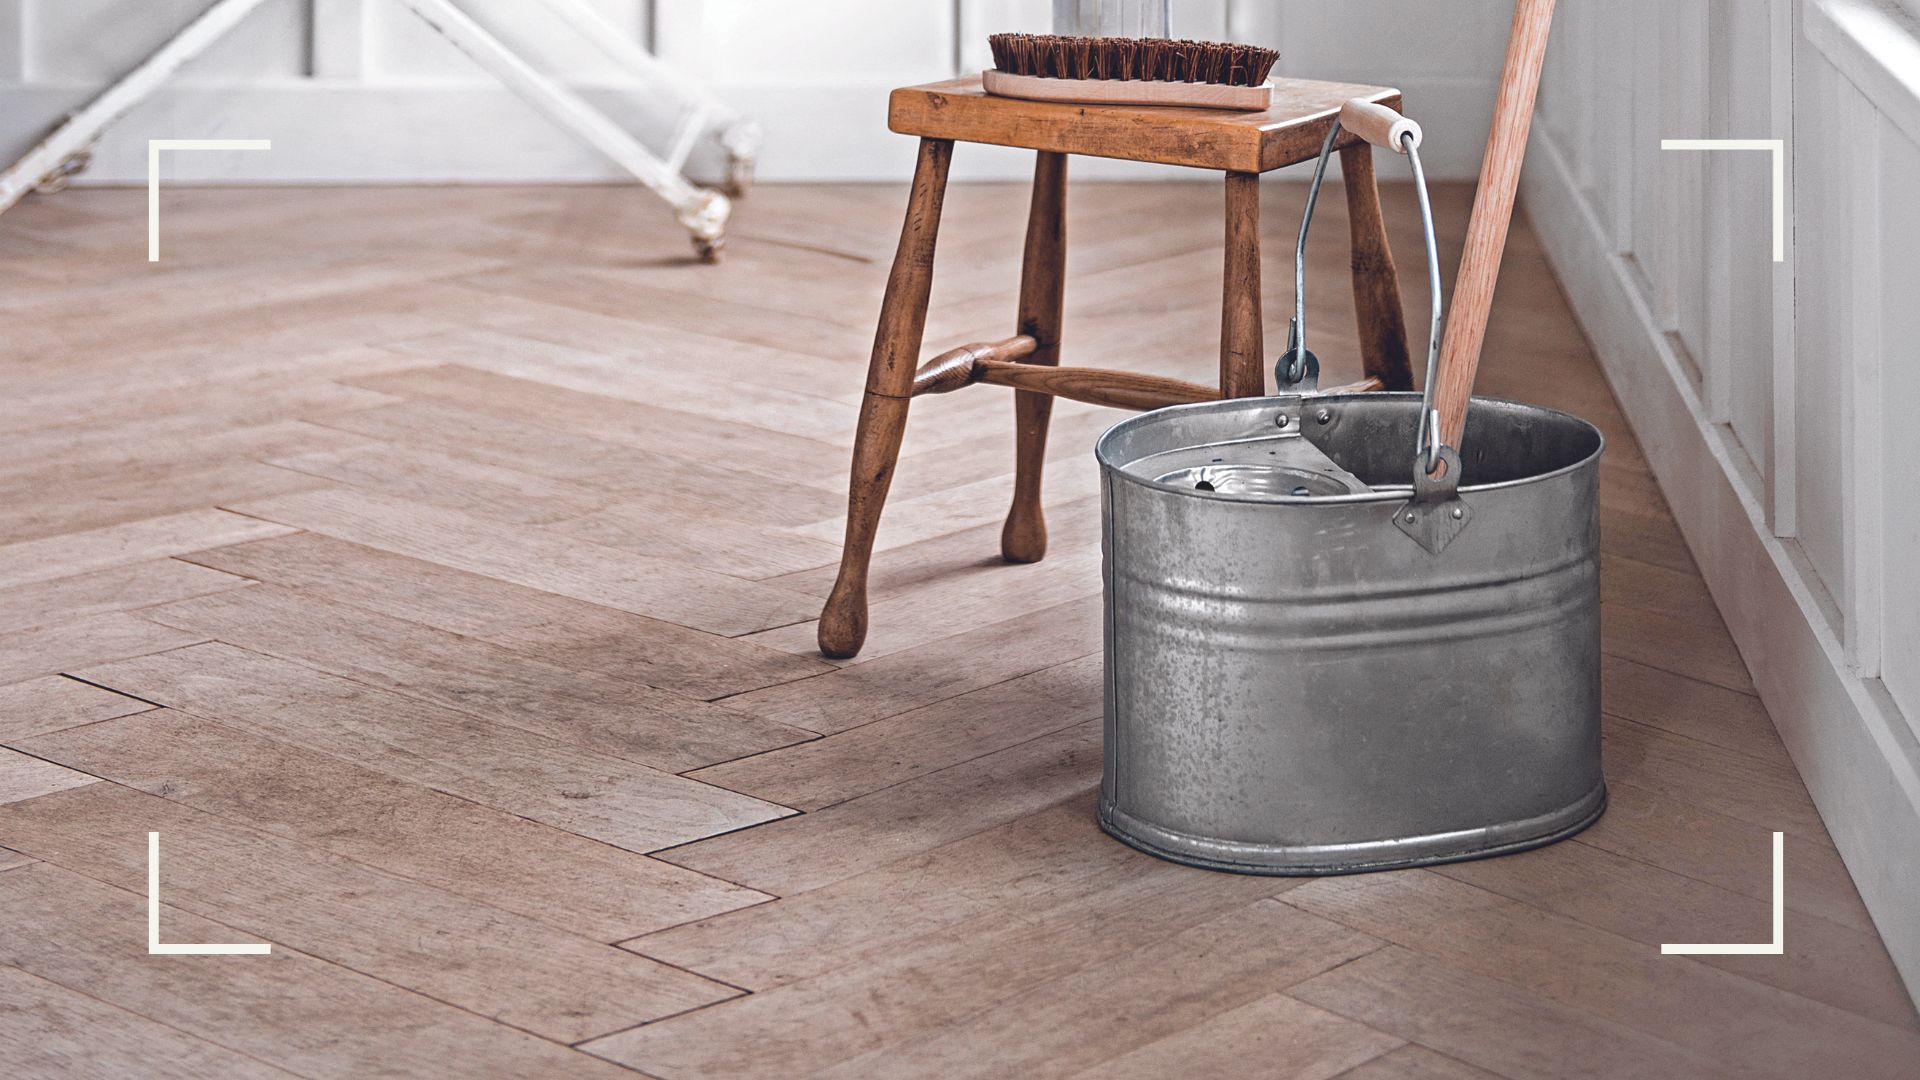 4 Reasons Why You Should Mop Your Floor Regularly